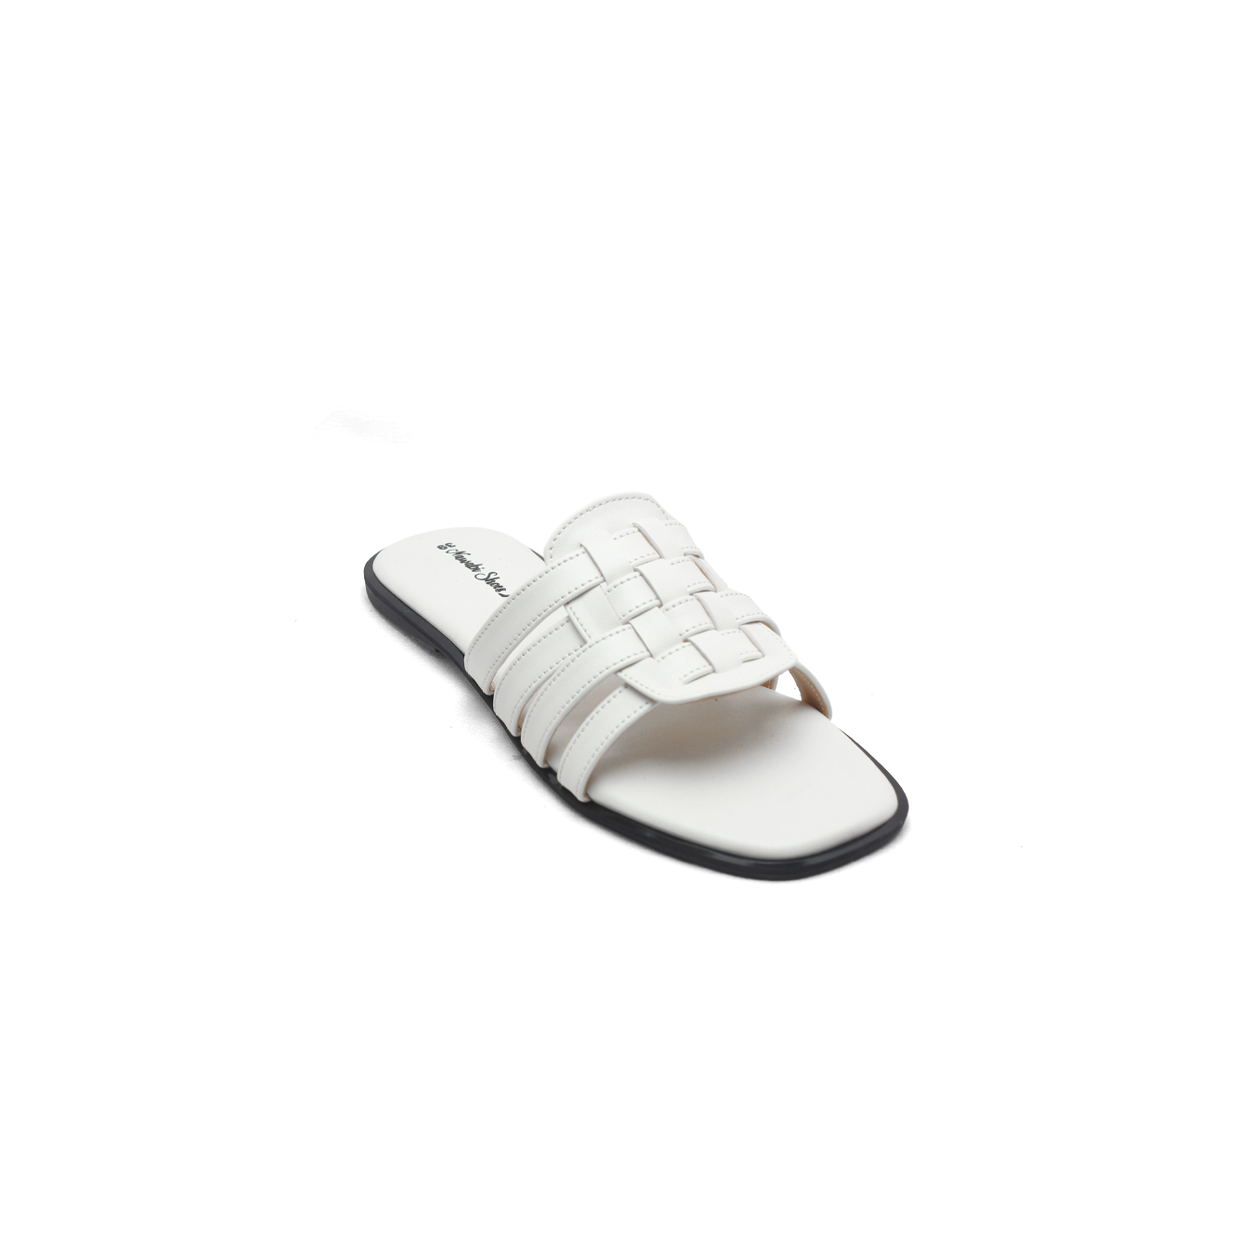 Buy Now for Women's Flat Sandals | Nawabi Shoes BD